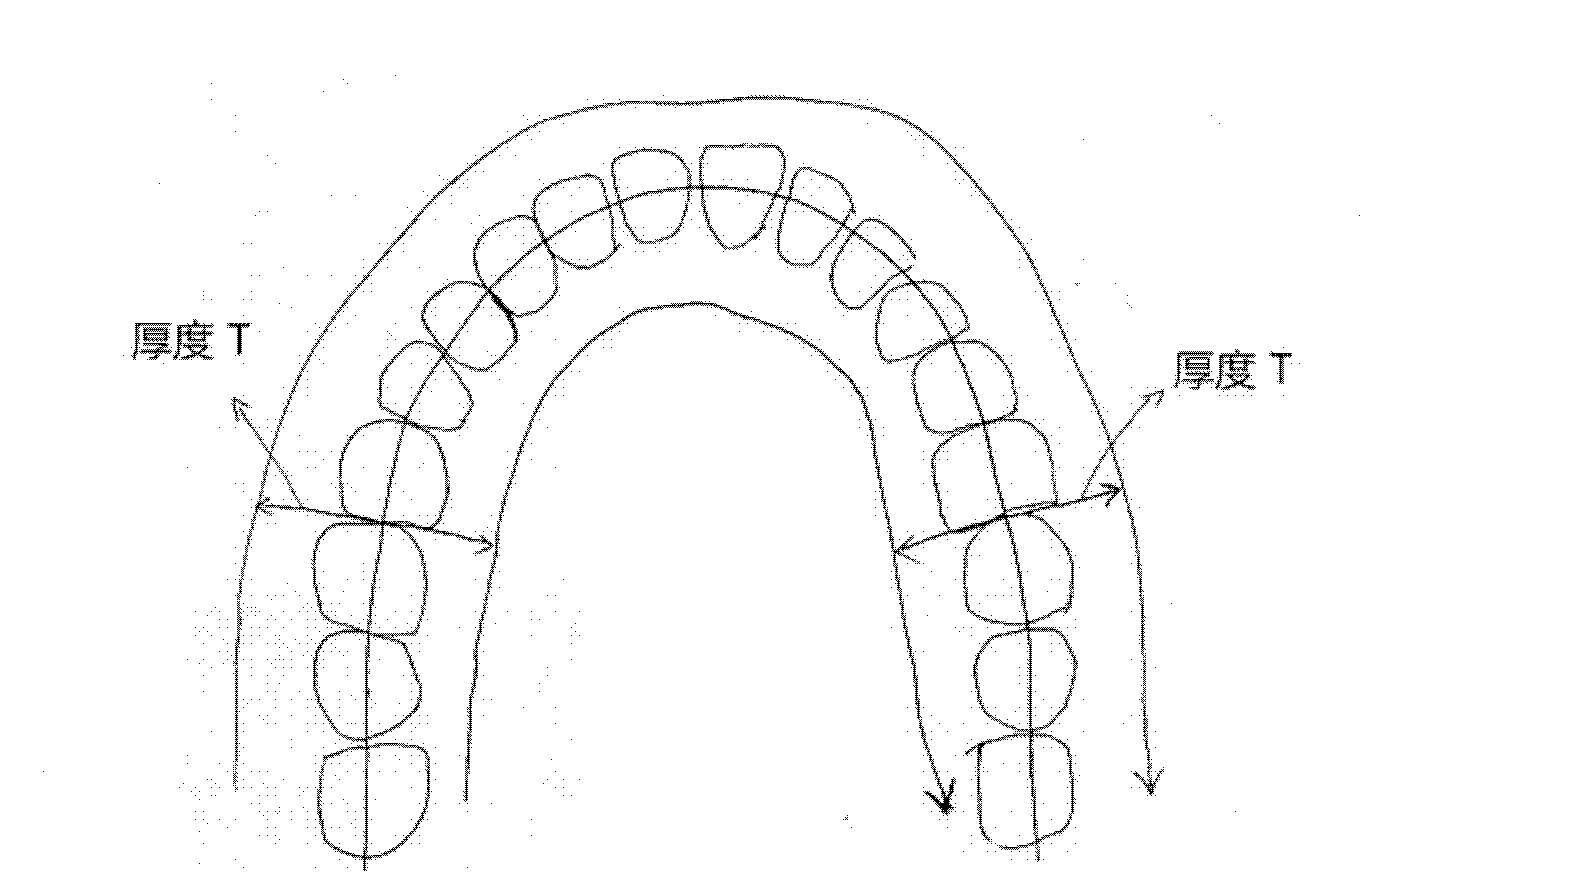 Data processing method of panoramagram generated by dental CBCT (cone beam computed tomography)